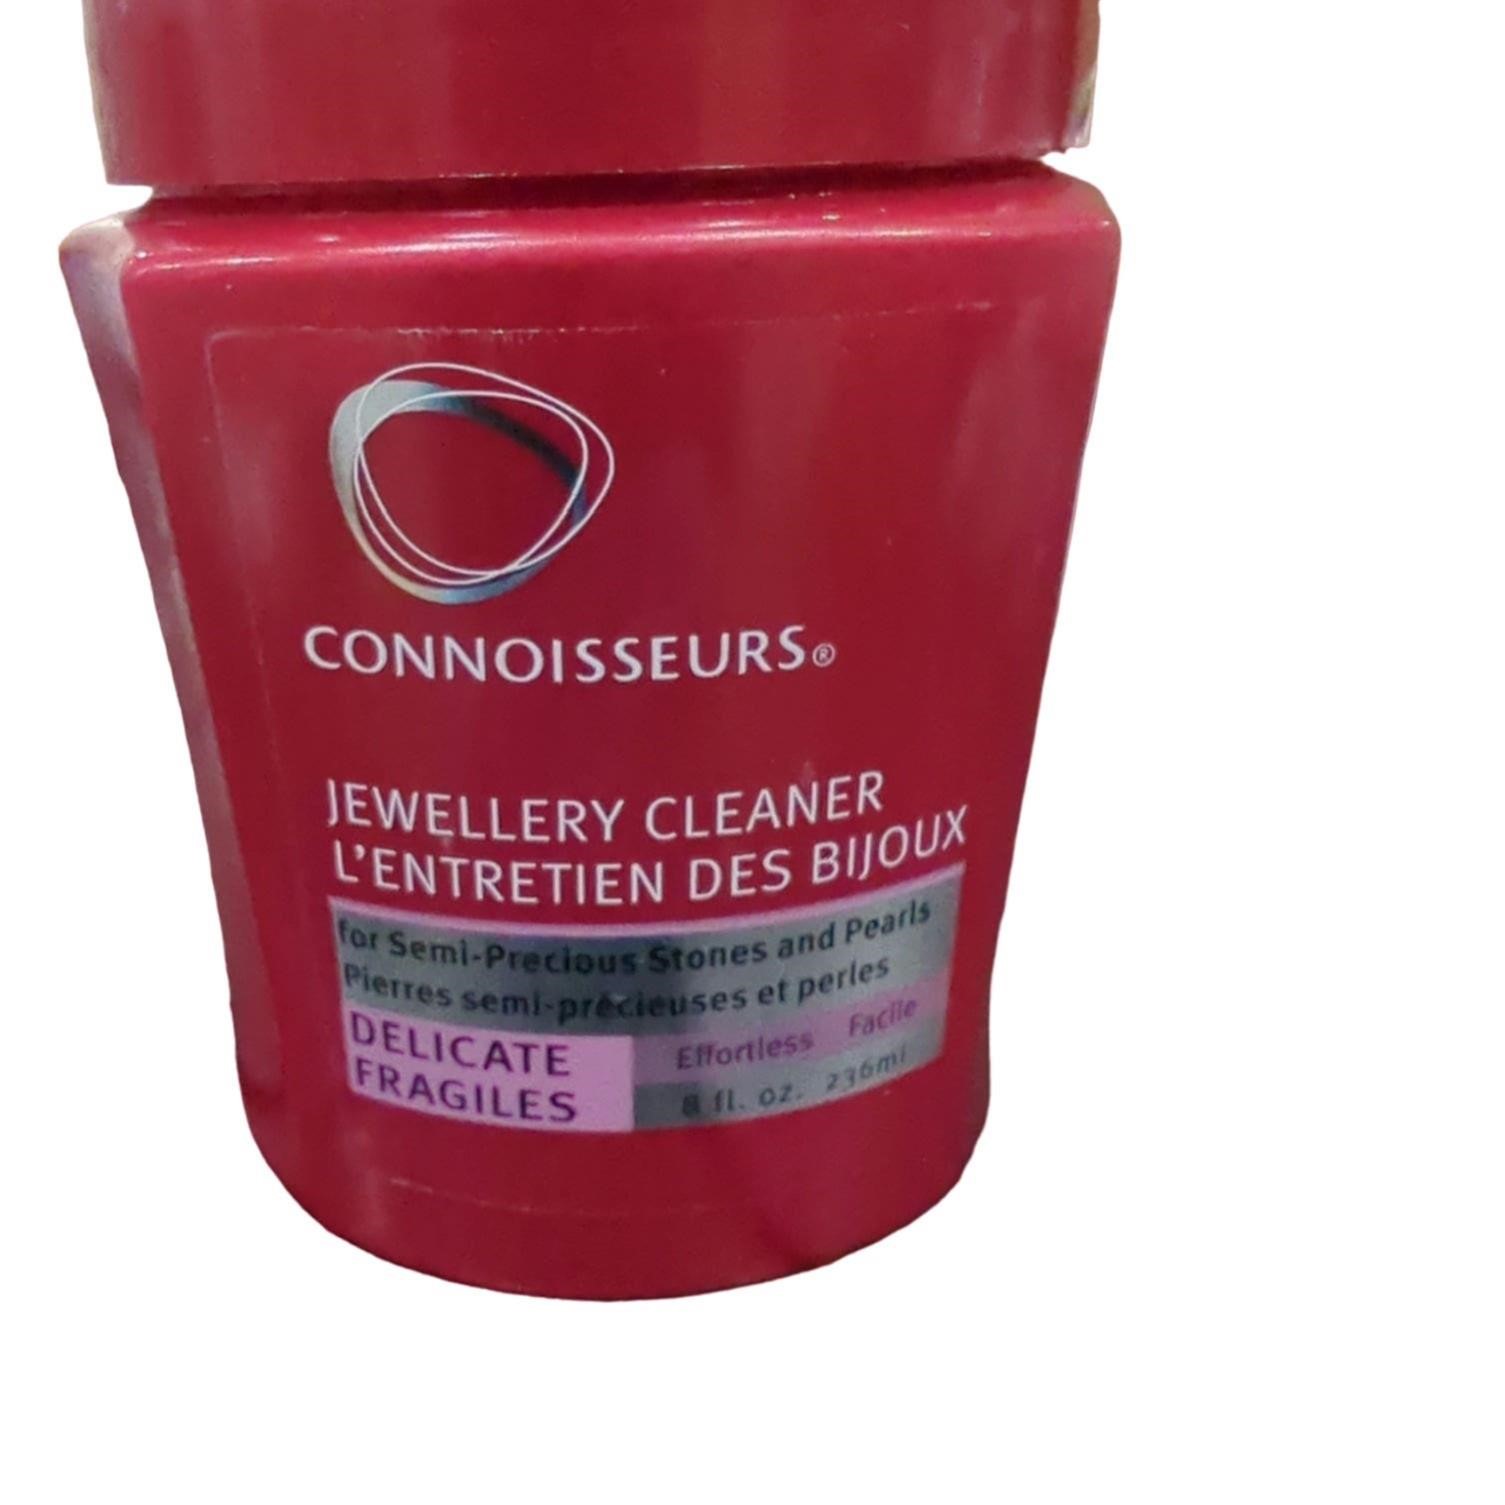 Connoisseurs jewelry cleaner